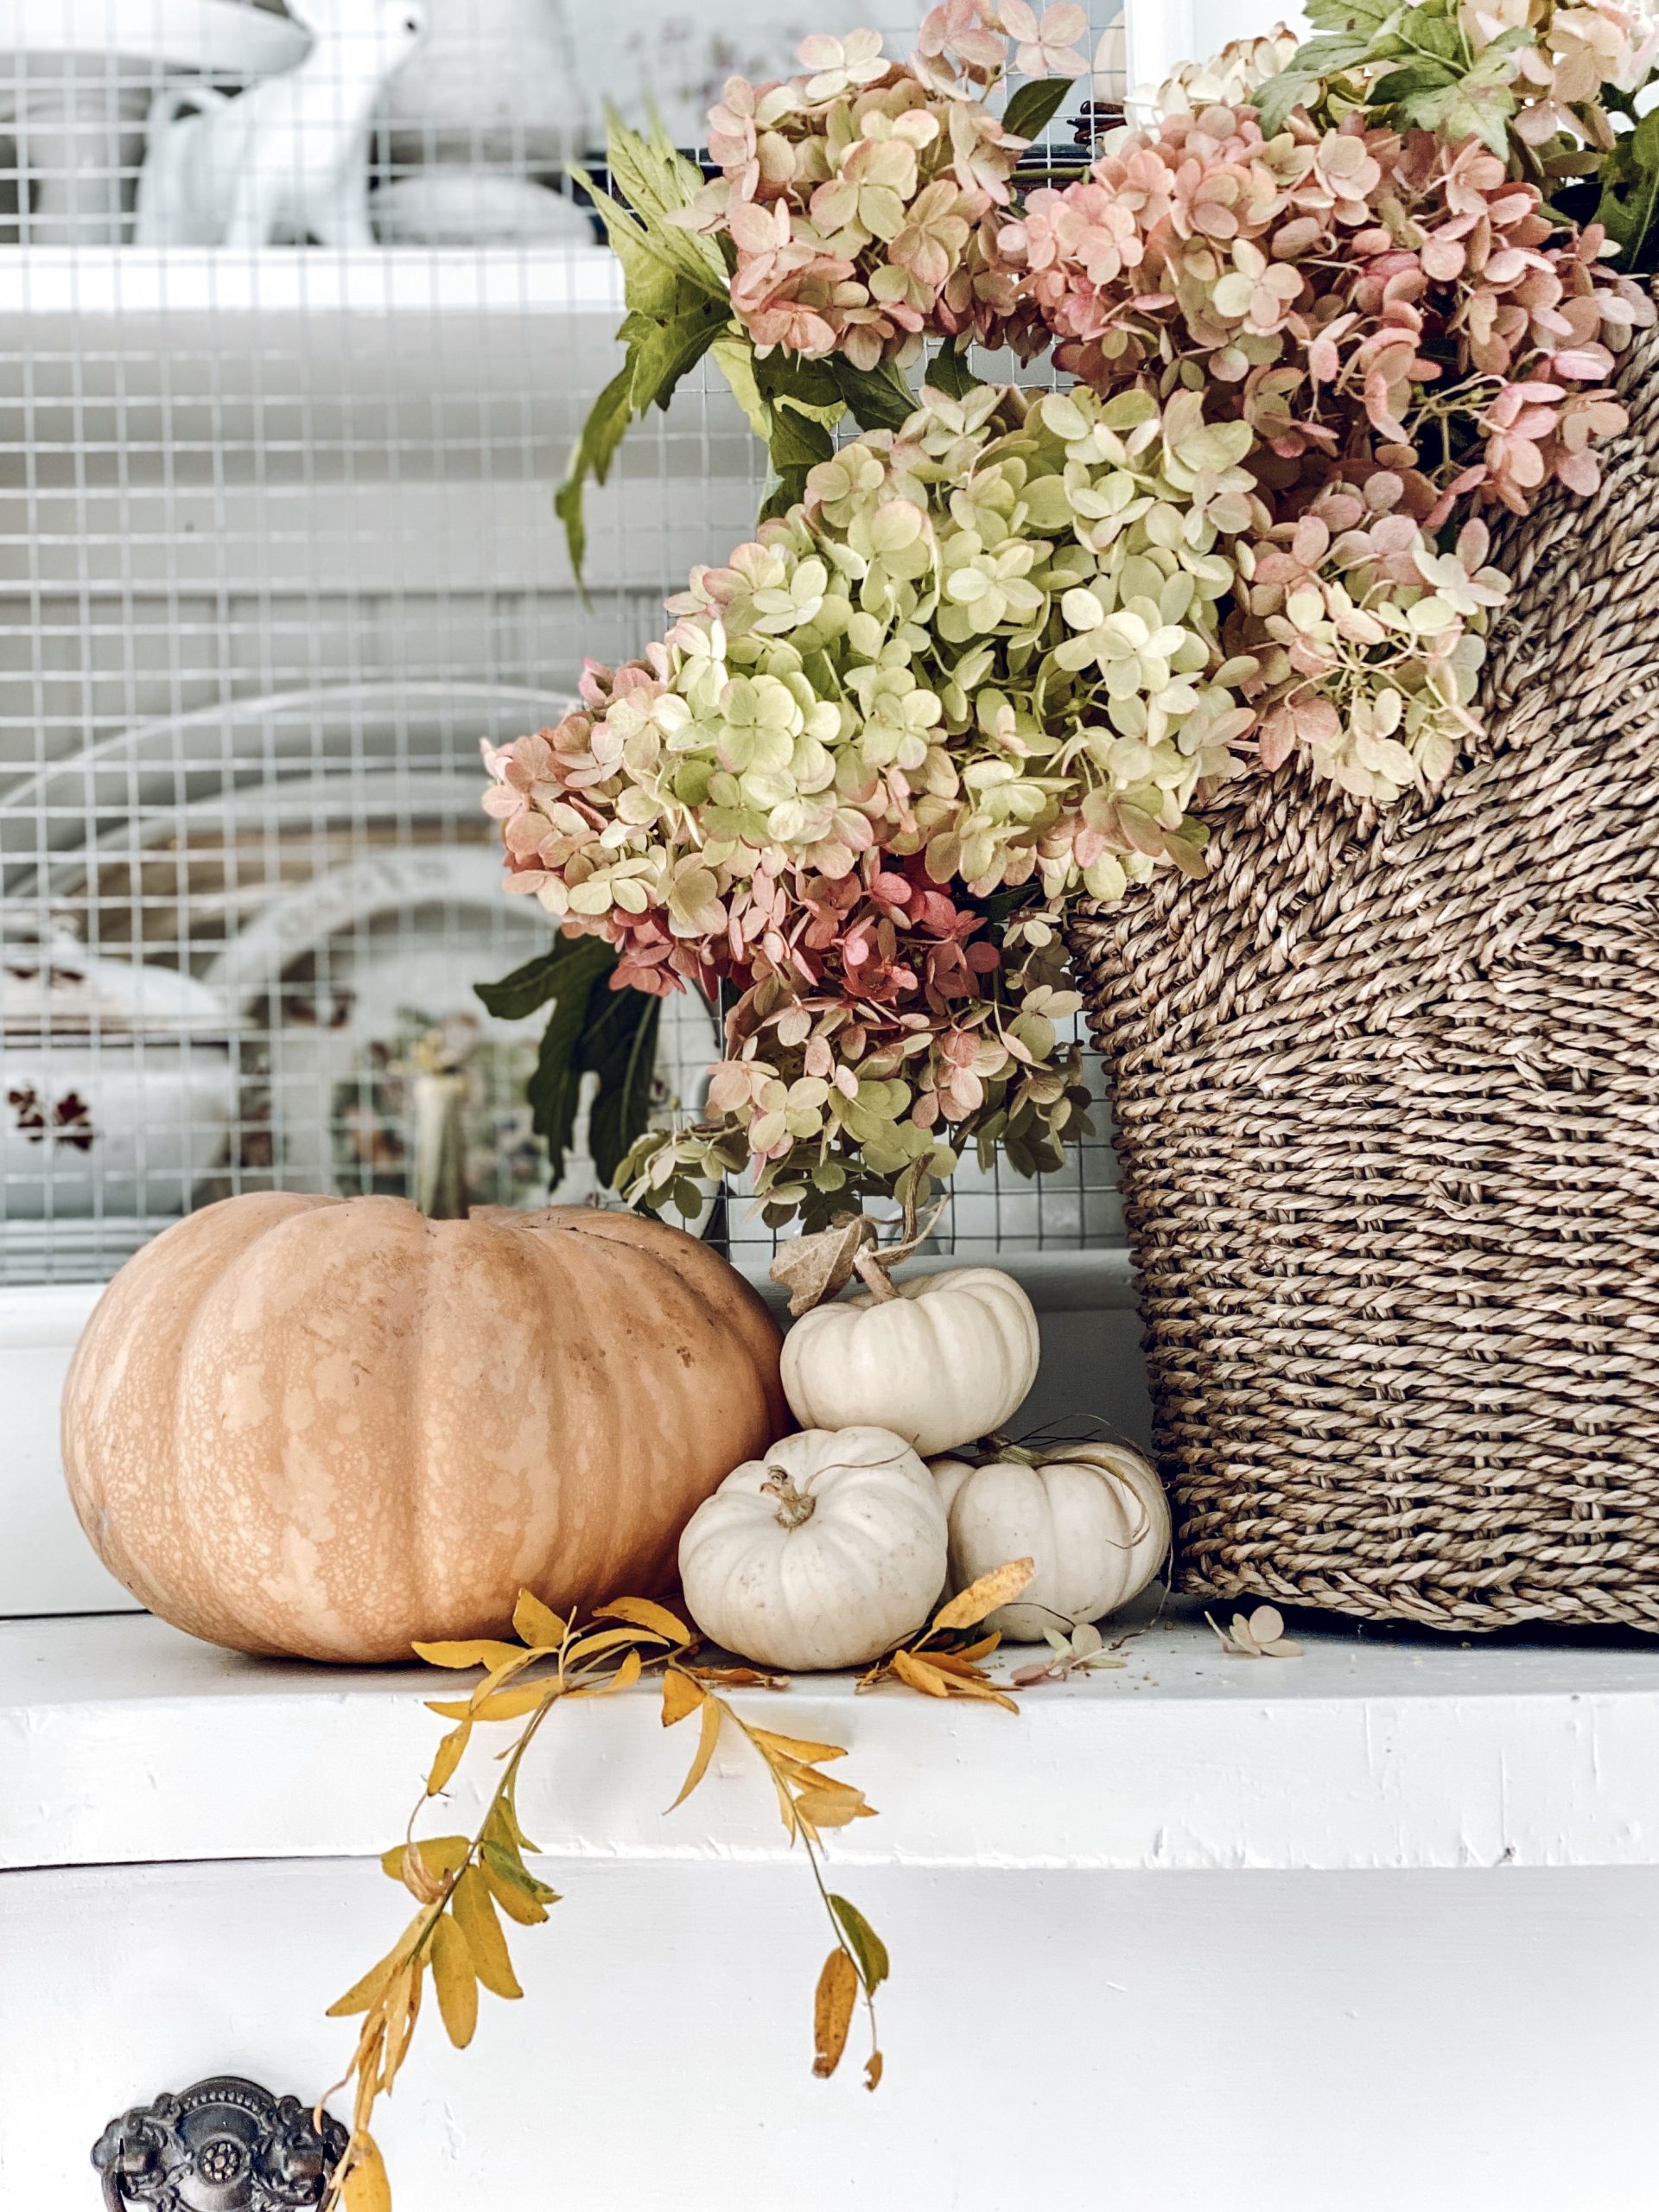 Decorating Ideas using a French Market Basket - LeCultivateur